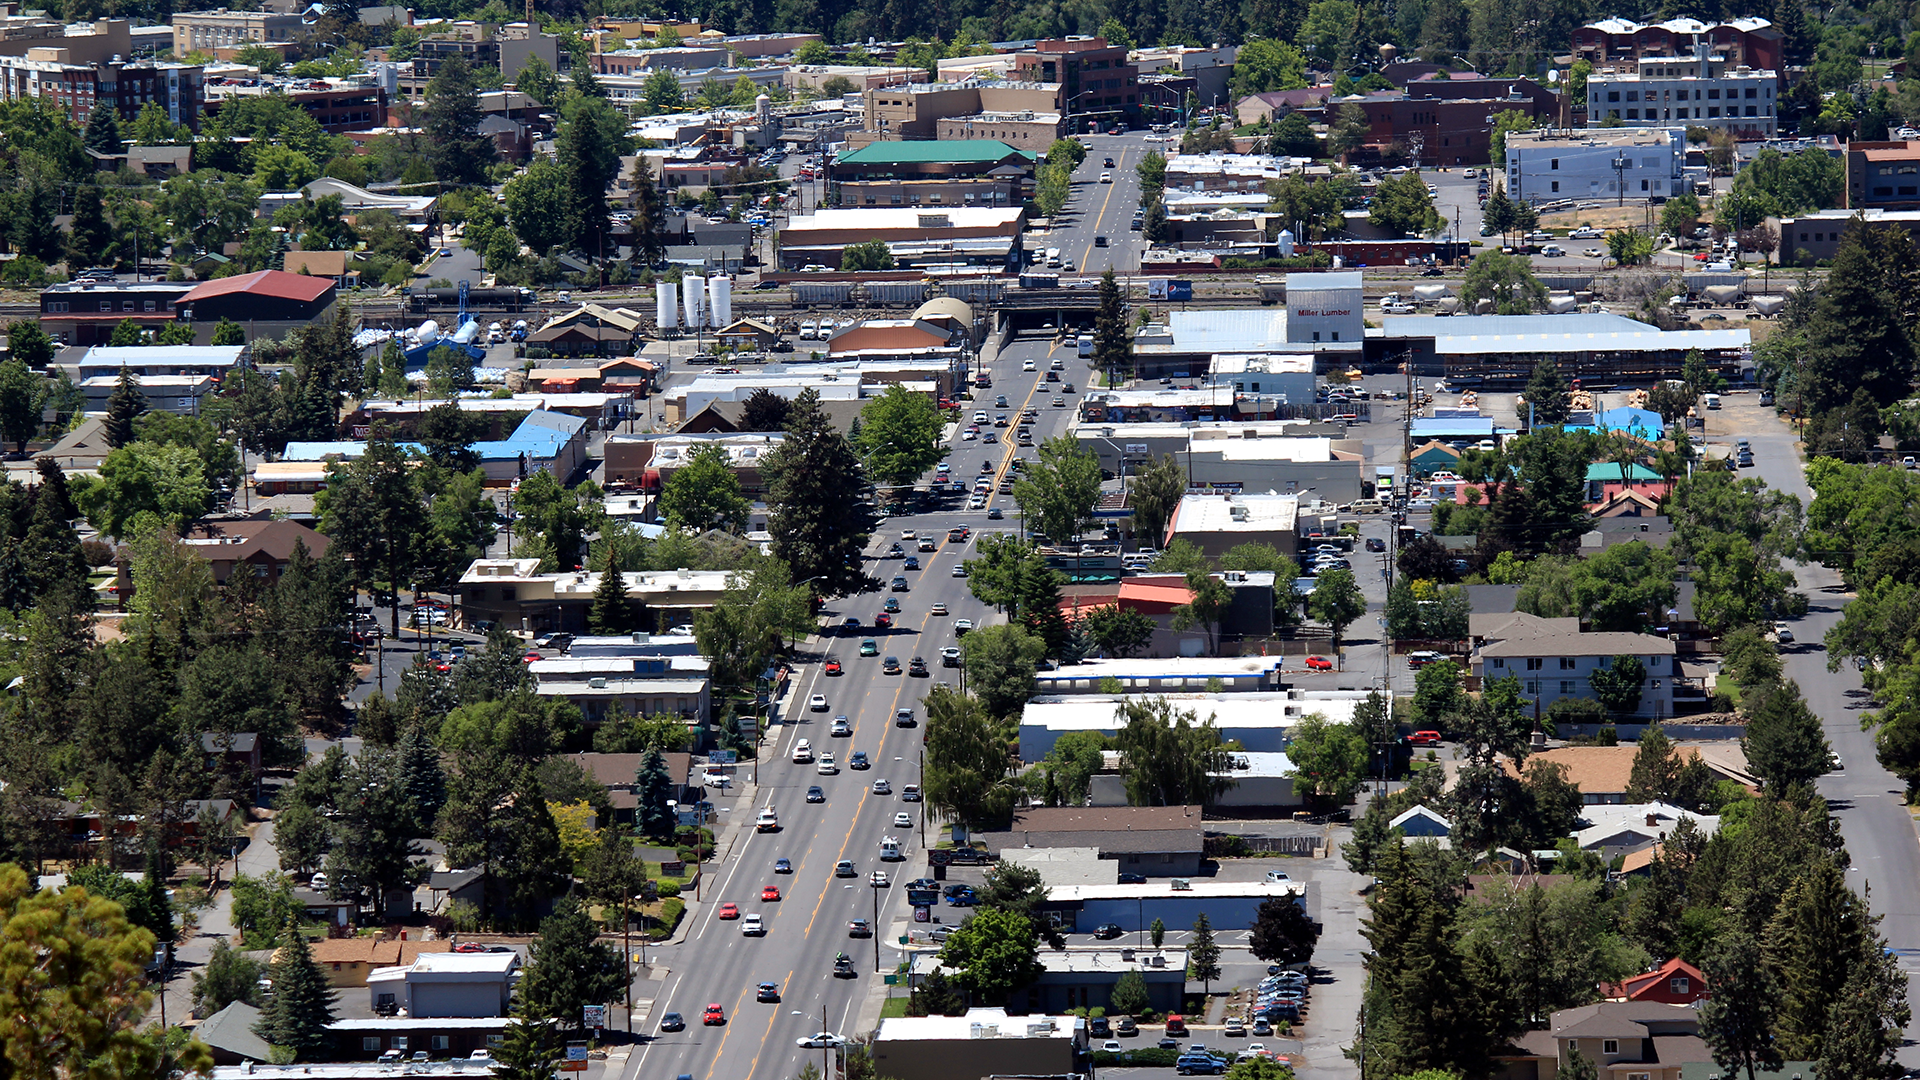 View of Bend, Oregon from Pilot Butte